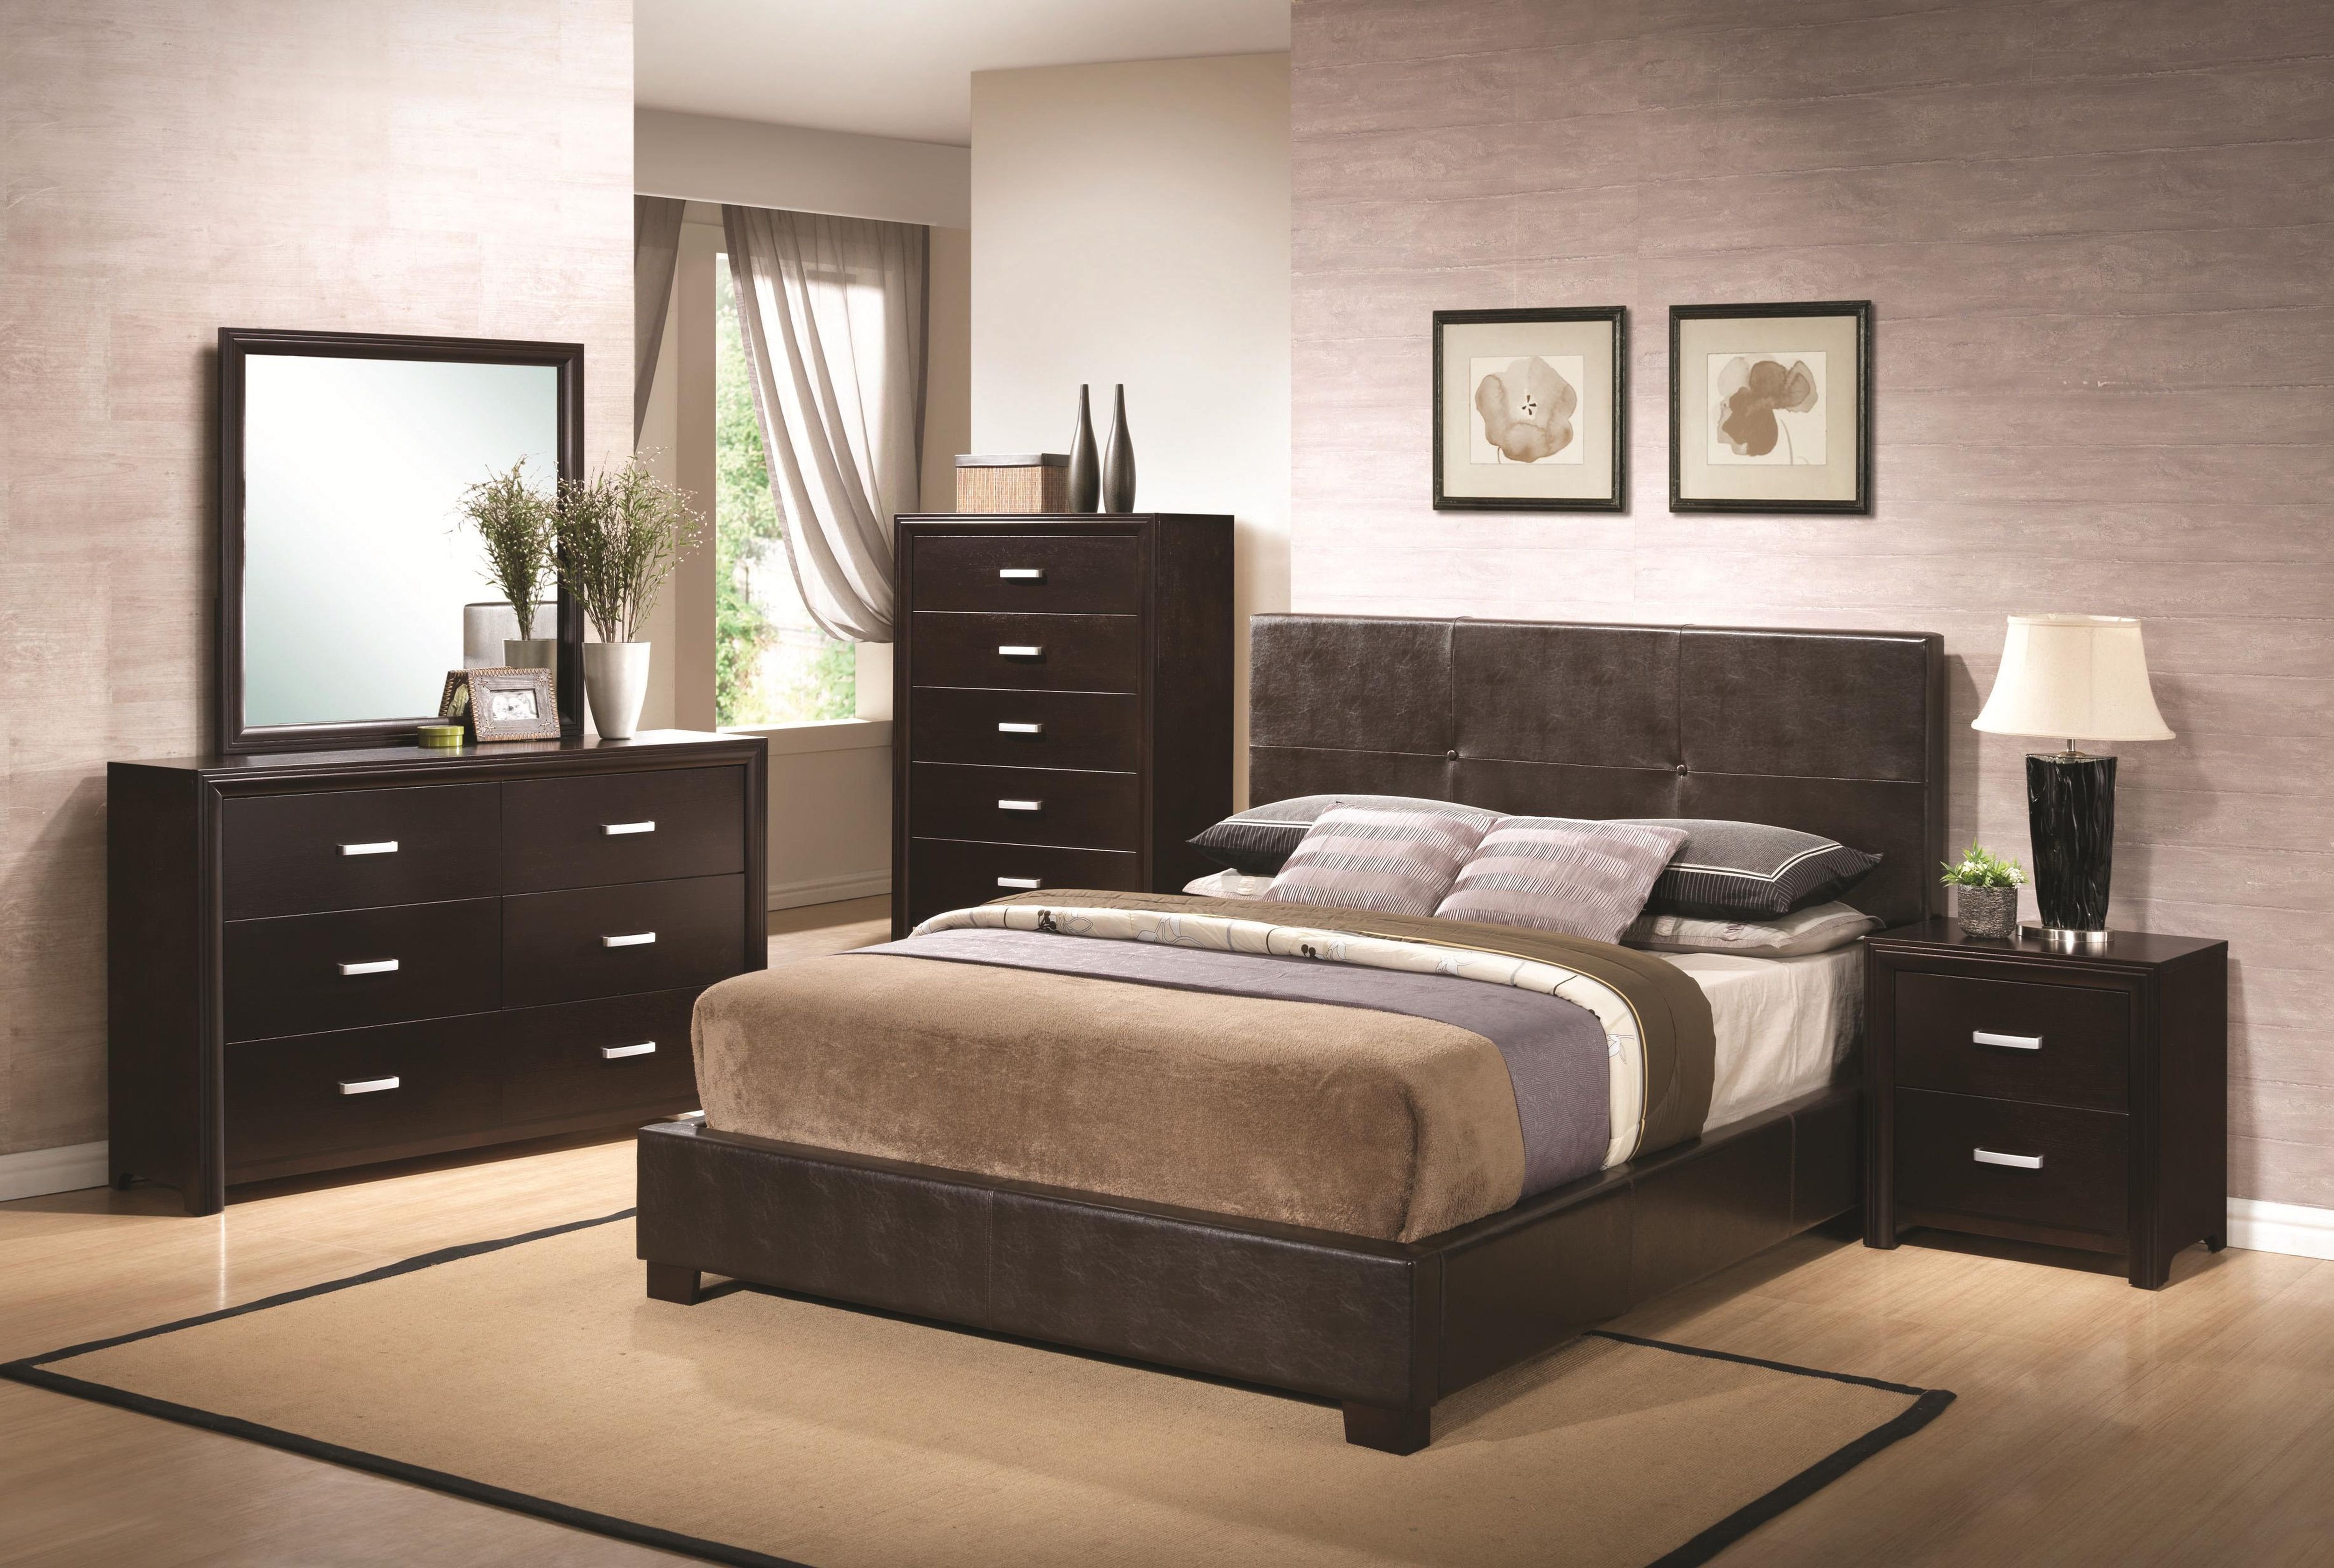 furniture for bedrooms ikea